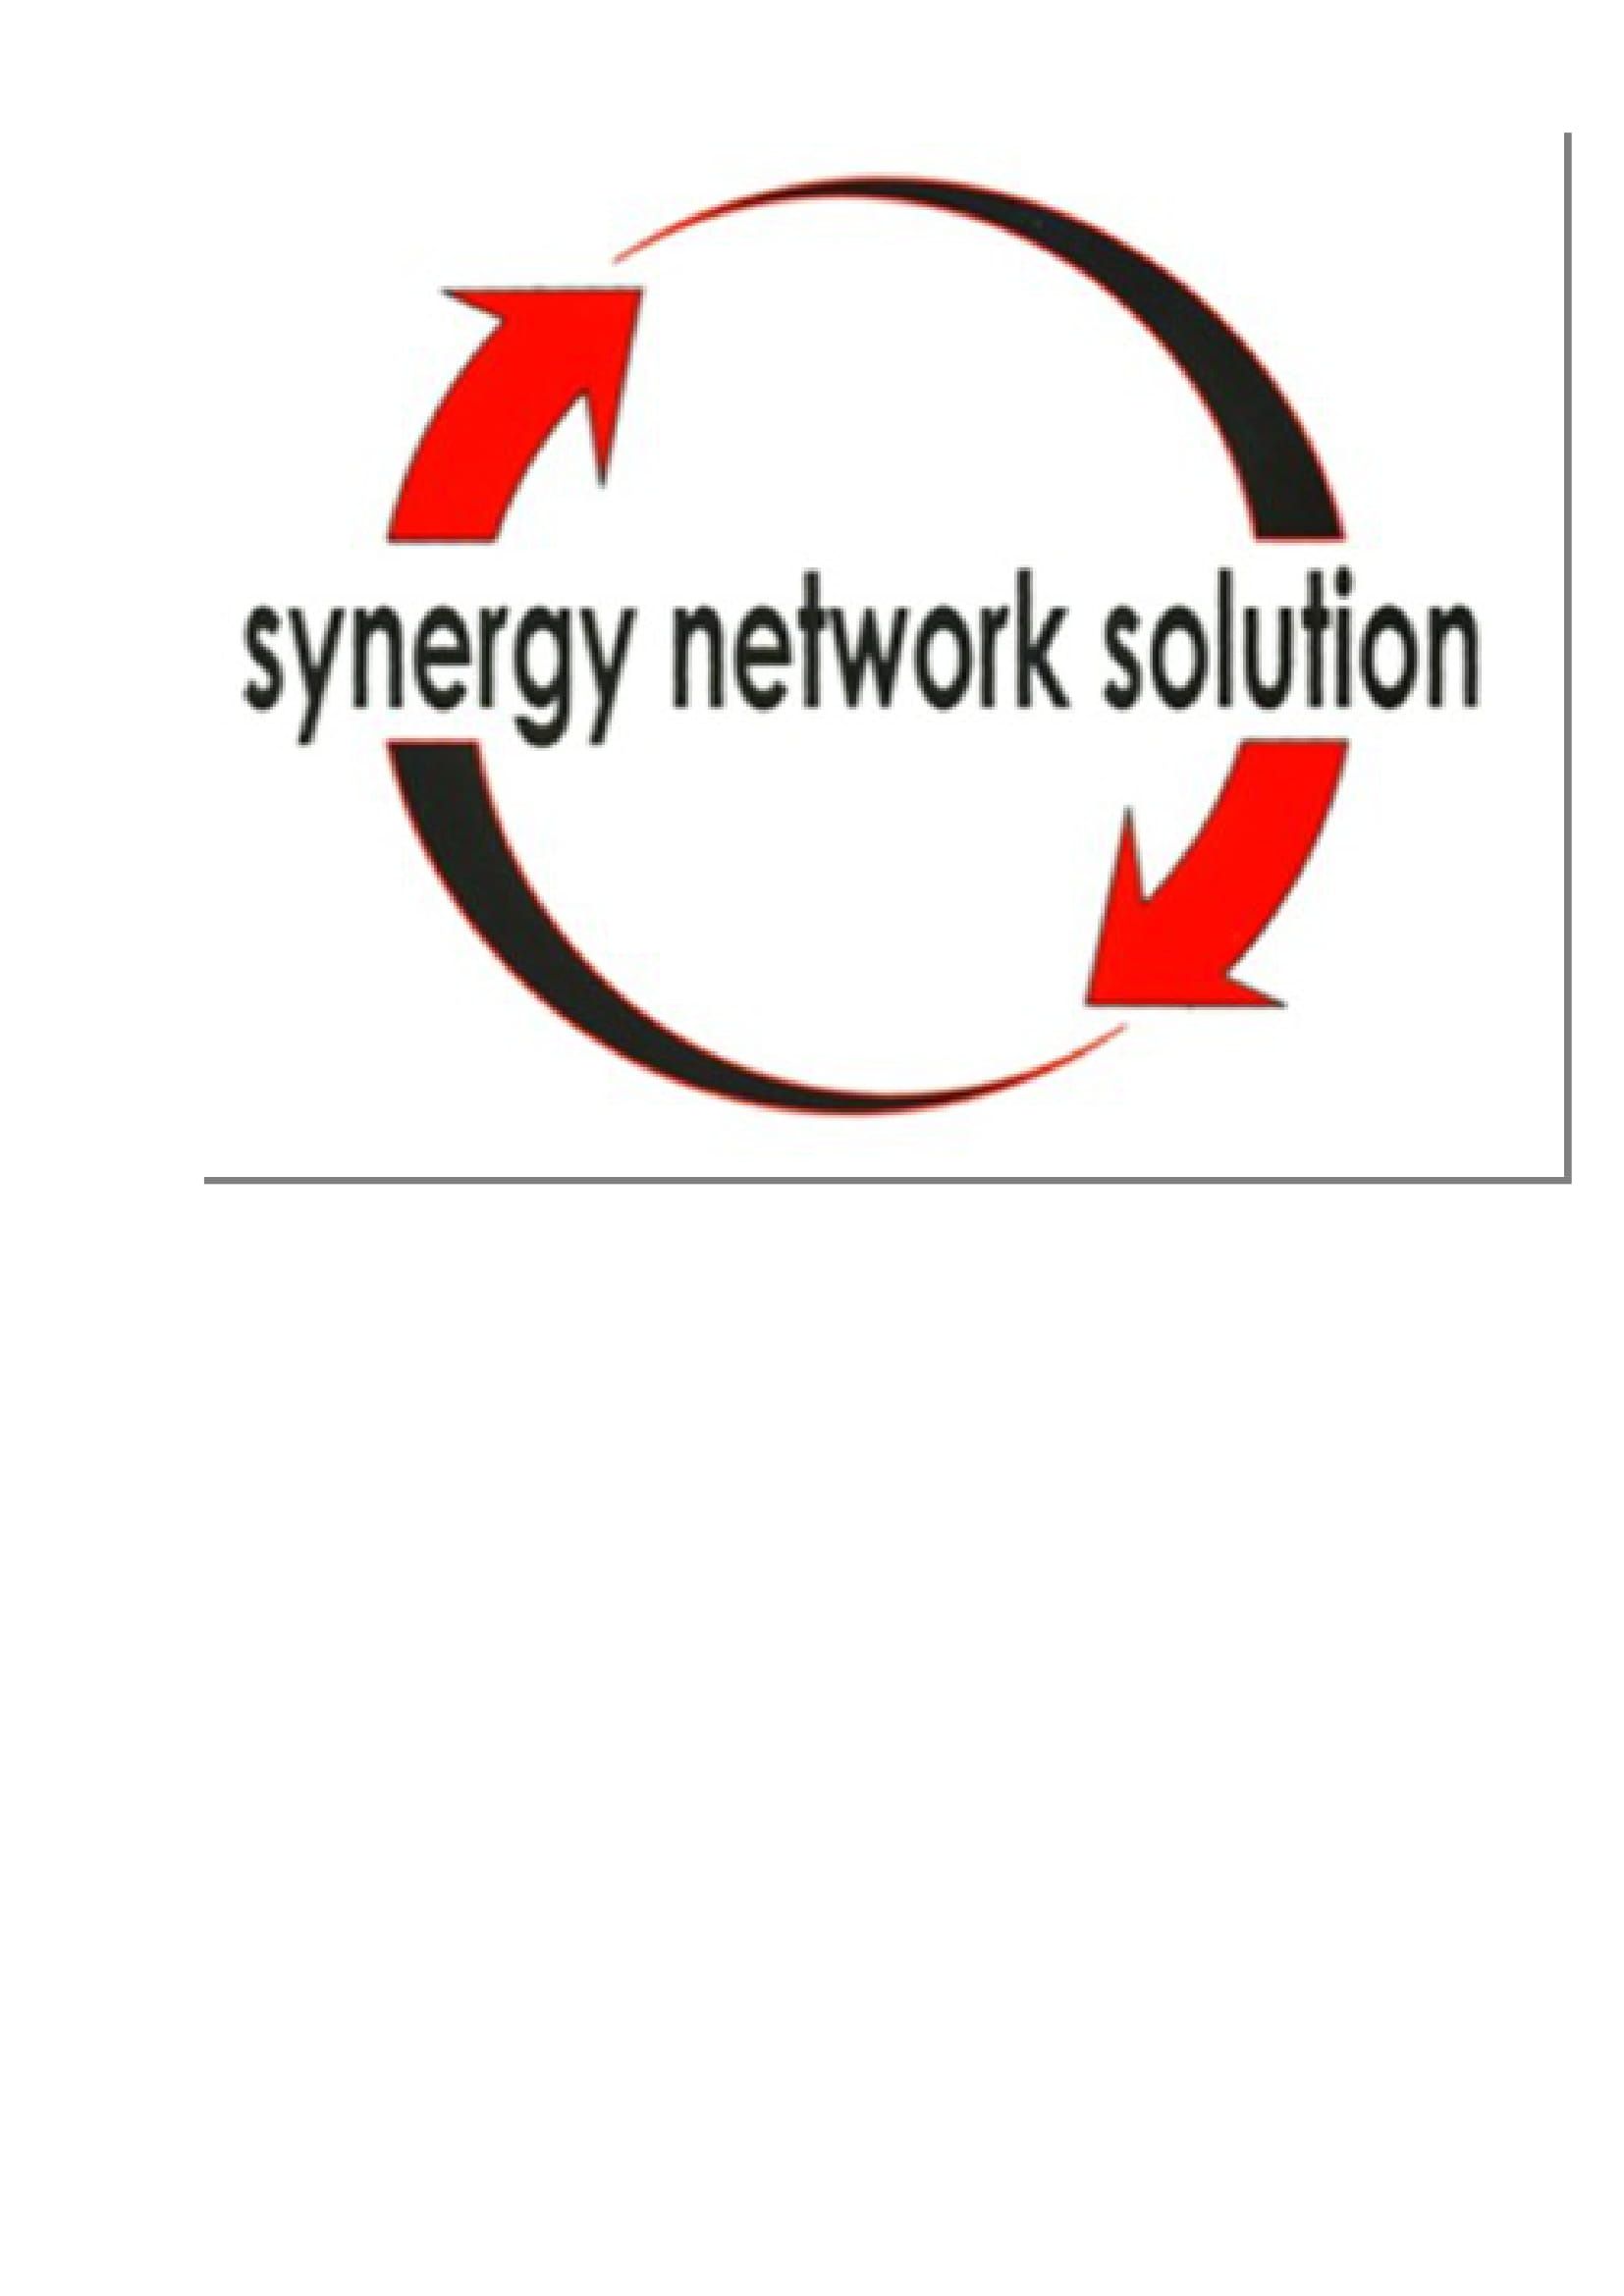 PT SYNERGY NETWORK SOLUTION